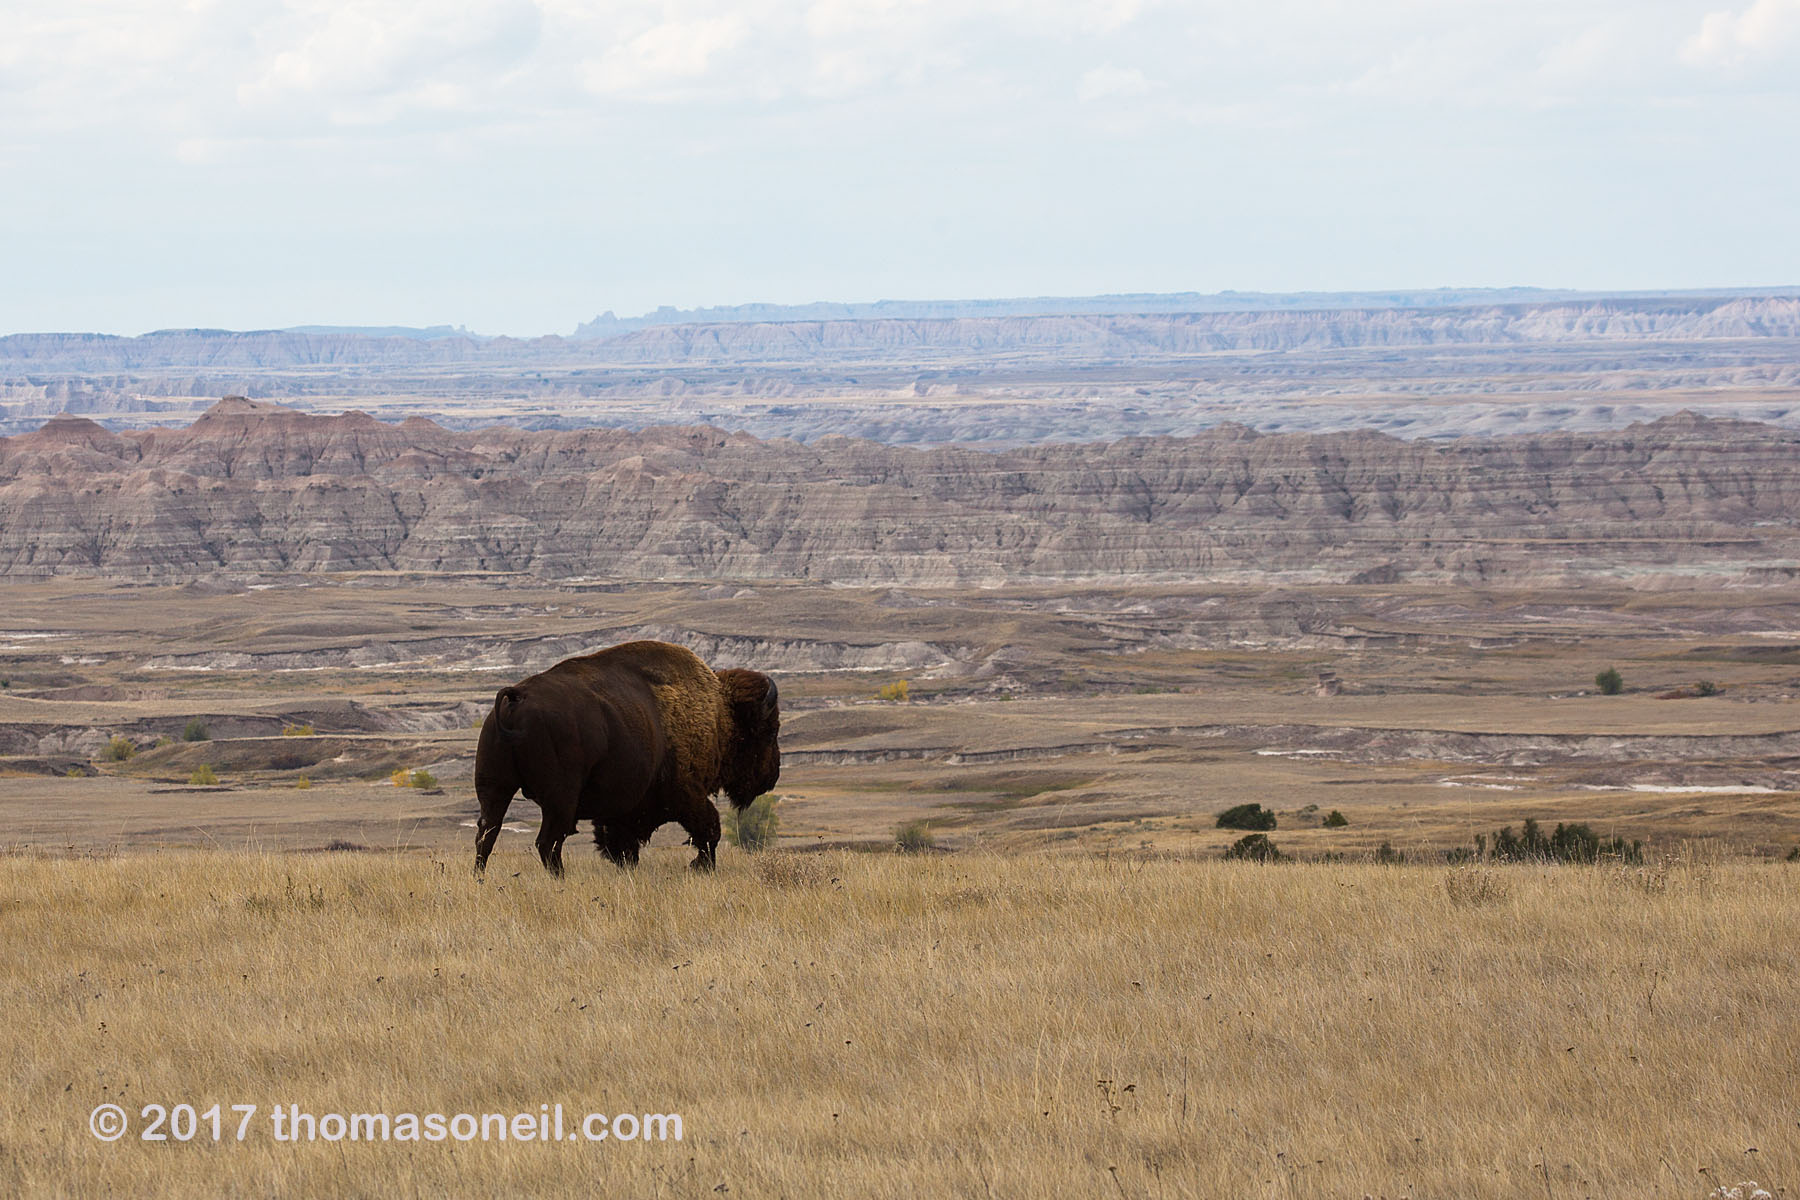 A solitary bison looking for a spot to graze along the rim above the Badlands, South Dakota.  Click for next photo.